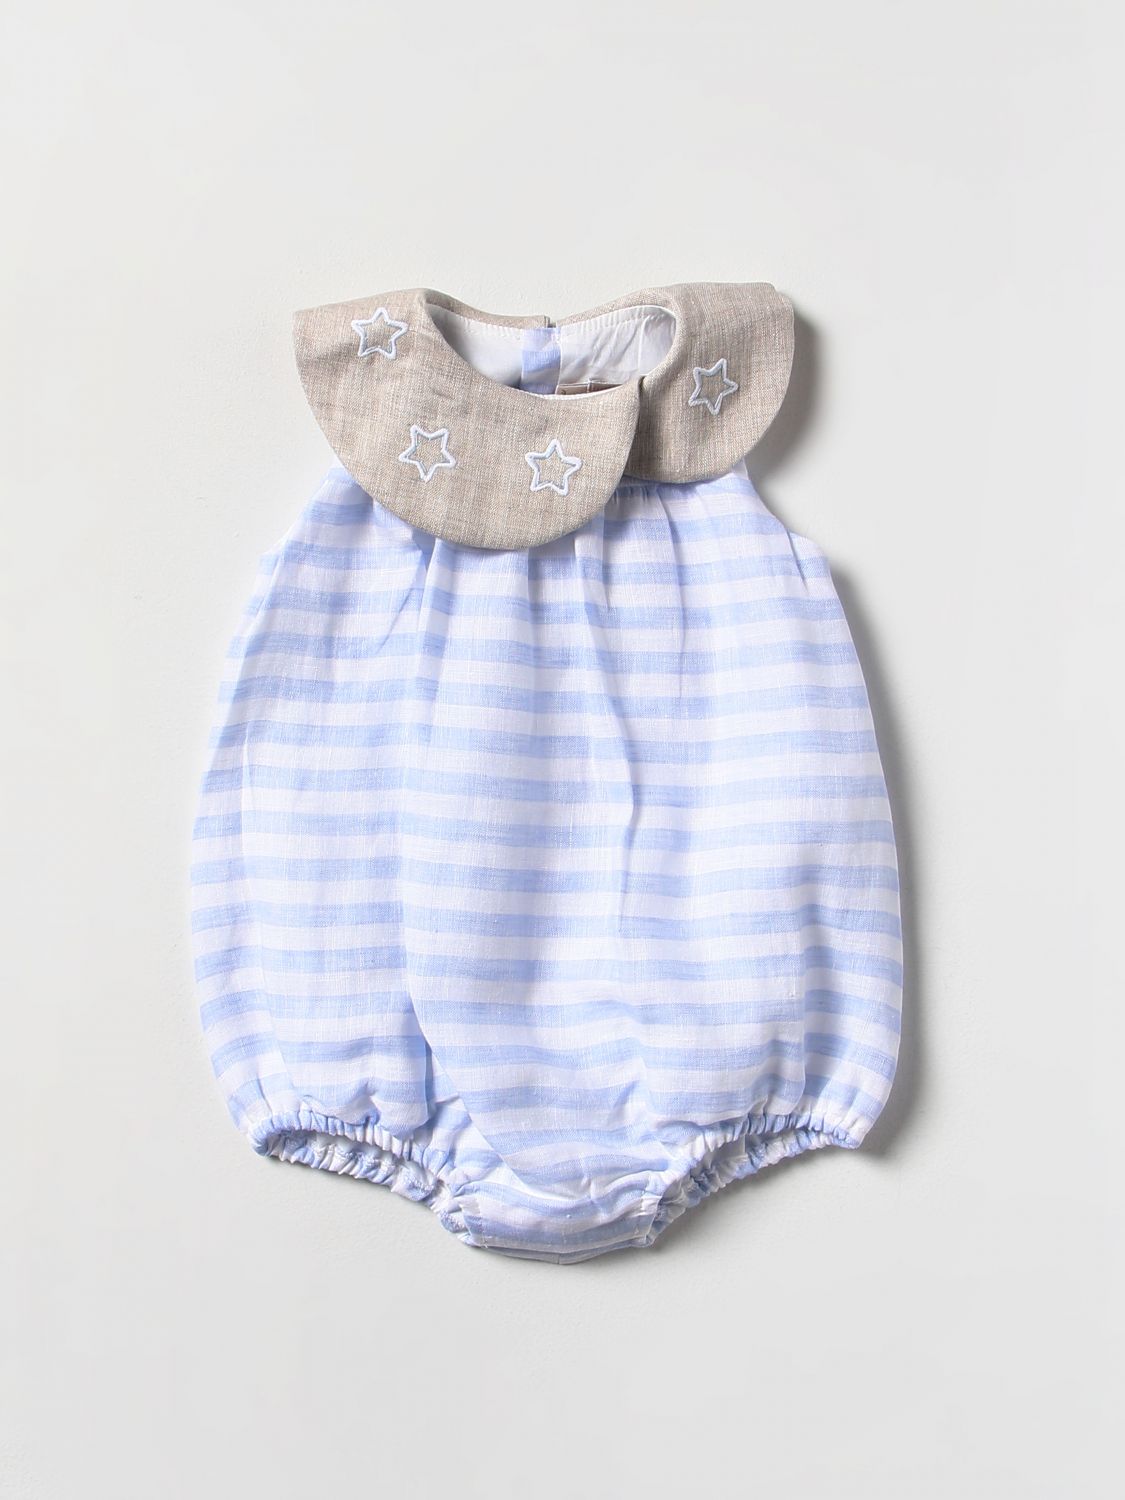 Tracksuits La Stupenderia: La Stupenderia tracksuits for baby gnawed blue 1